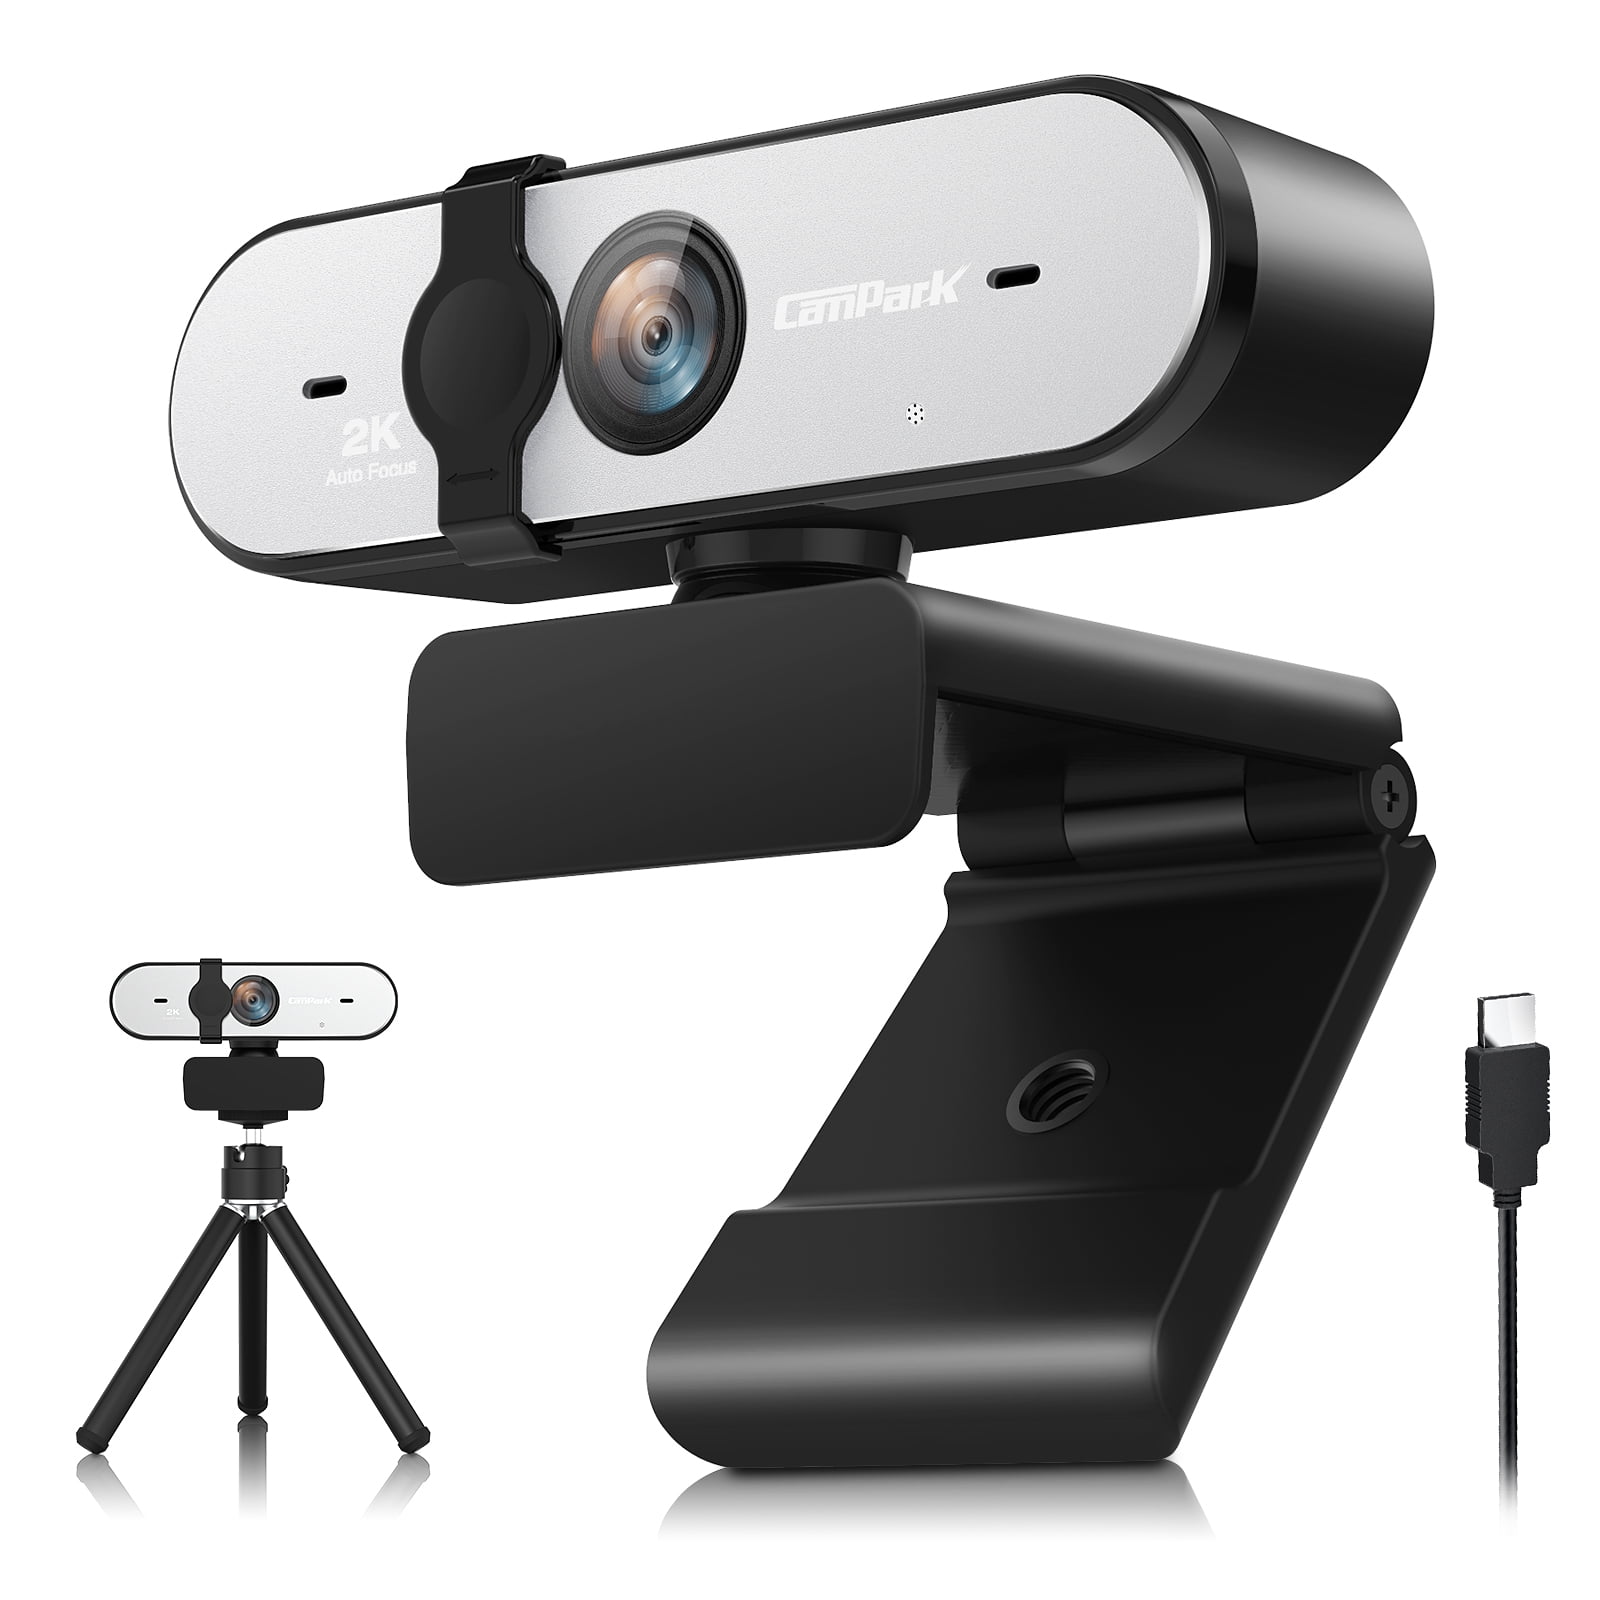 Games Camera Computer 2K/4MP/1440P,USB Plug & Play Web Camera with Privacy Shutter and Tripod for YouTube Studying Webcam with Microphone for Desktop Video Calls Skype Conference 